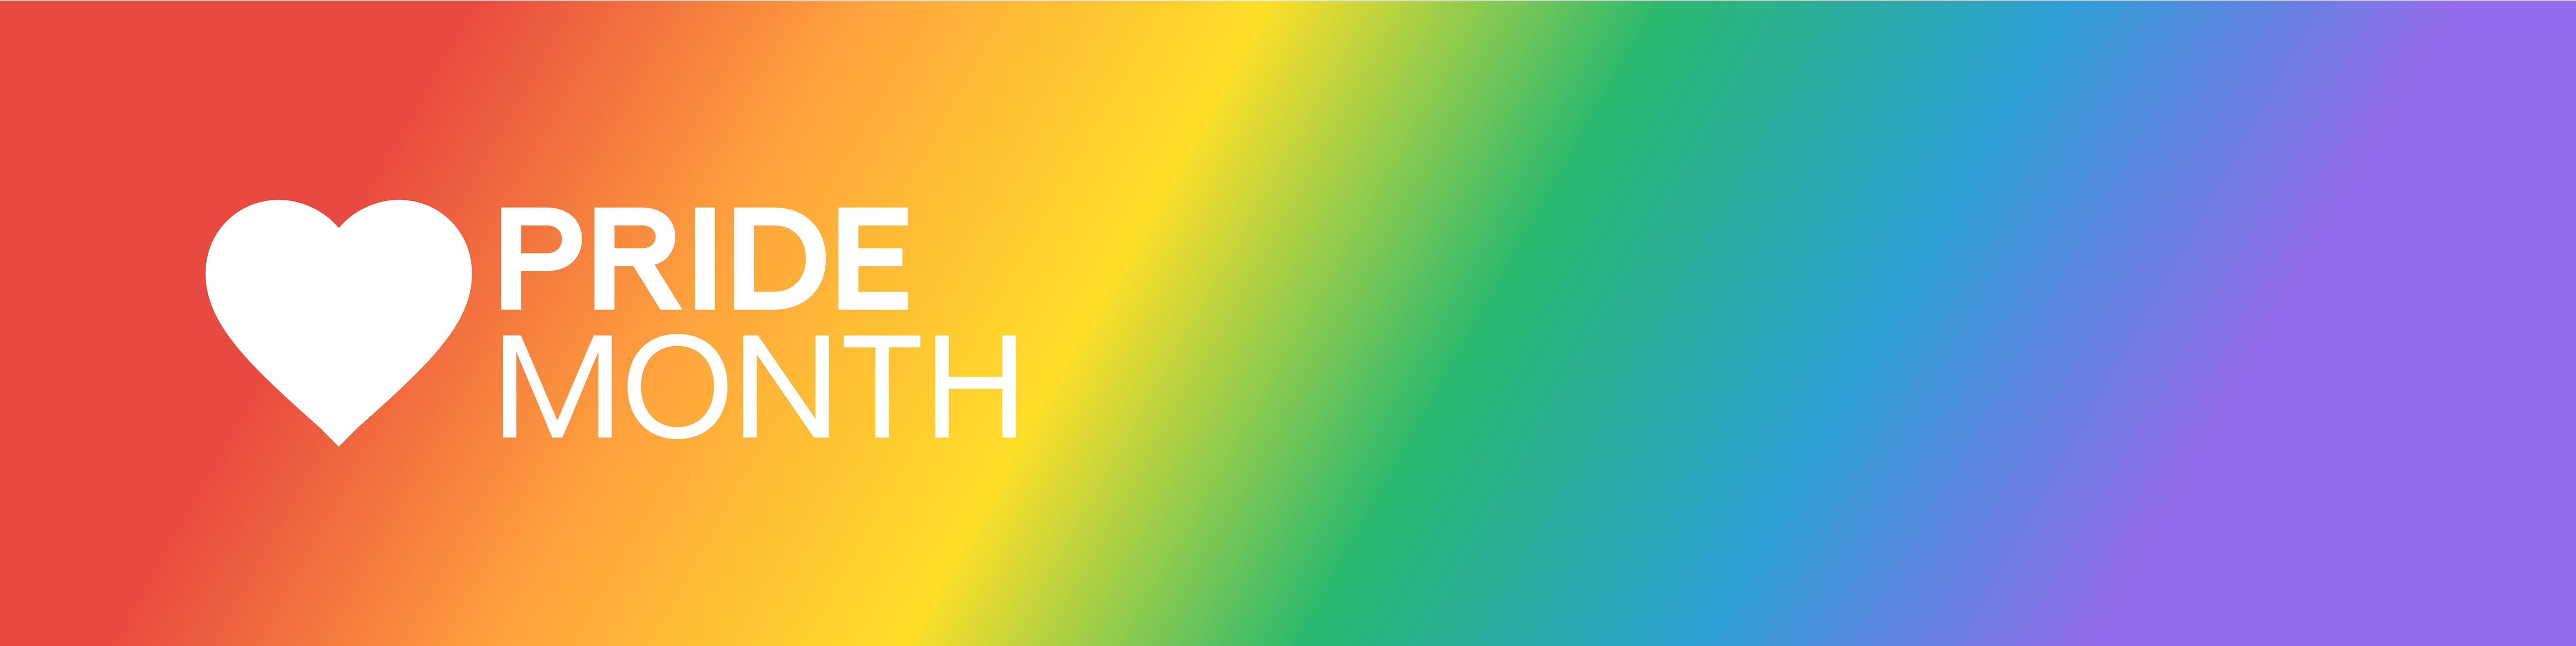 Image with rainbow background colors and the words Pride Month